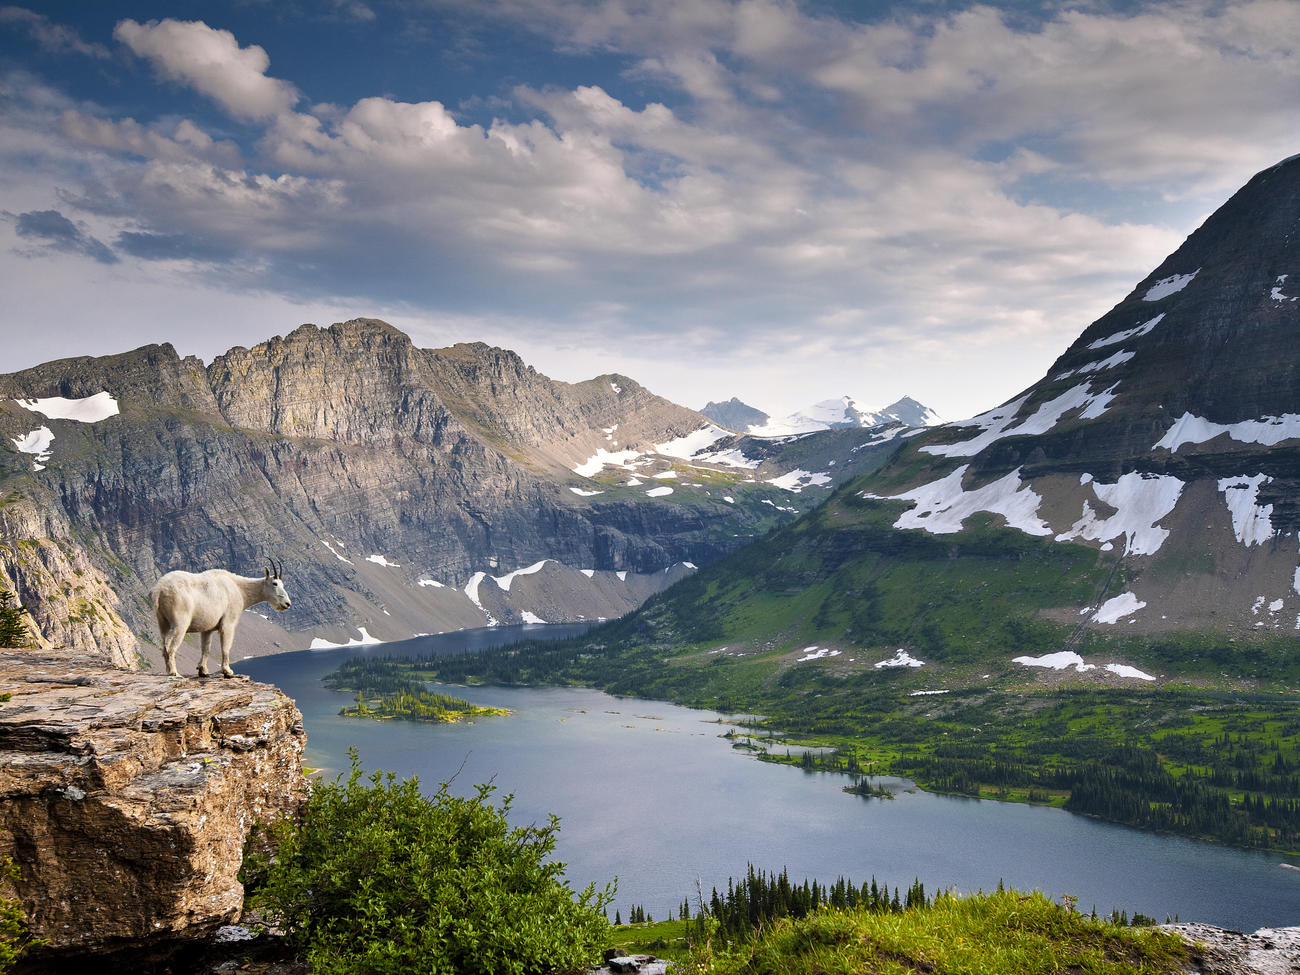 Please Don’t Treat National Parks Like a Garbage Can, Says Glacier National Park